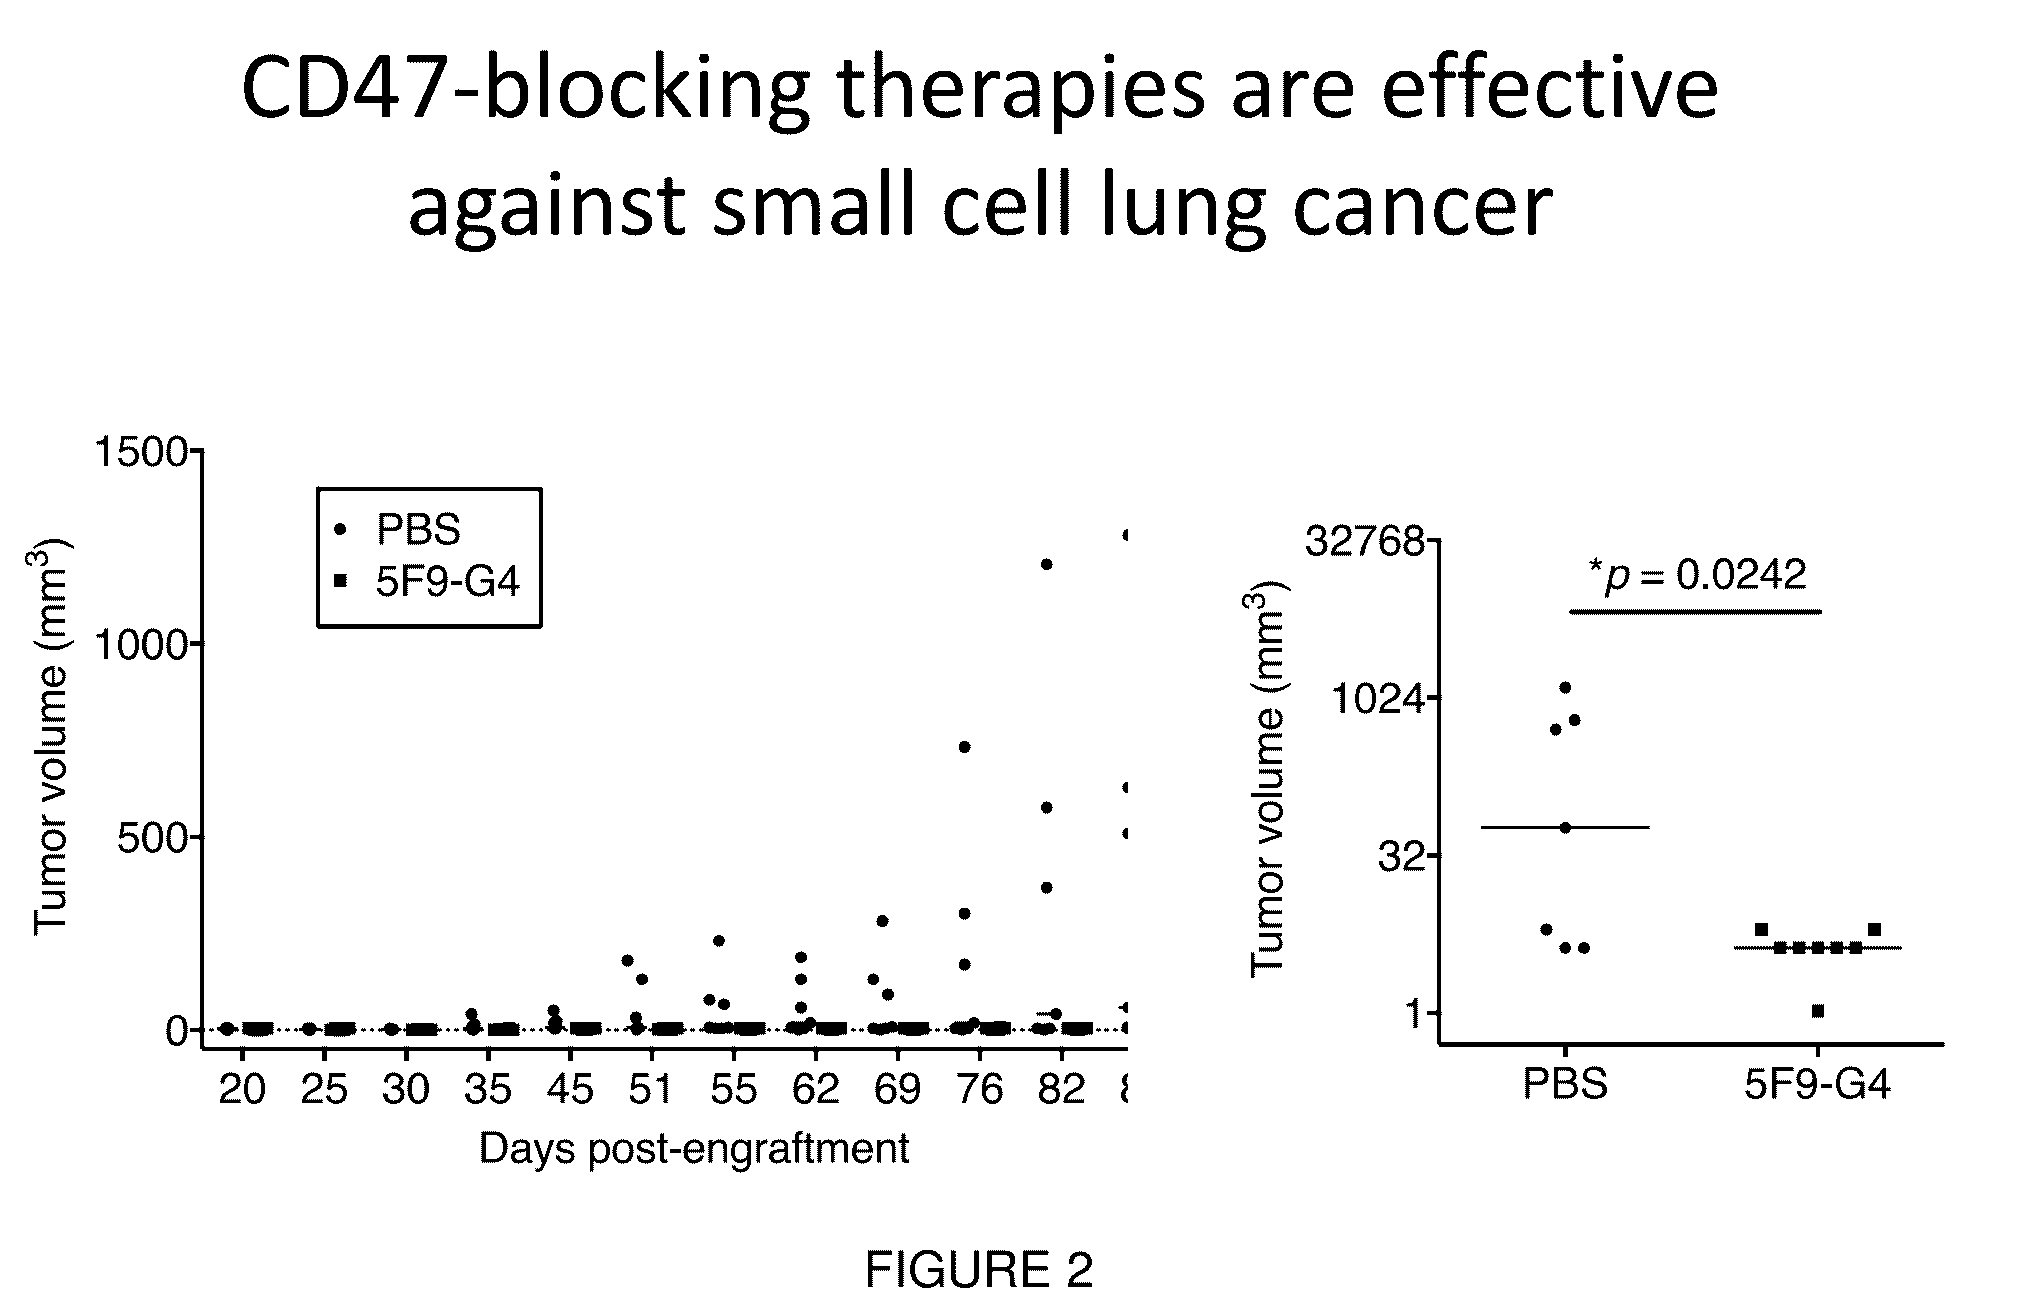 Targeted Therapy for Small Cell Lung Cancer